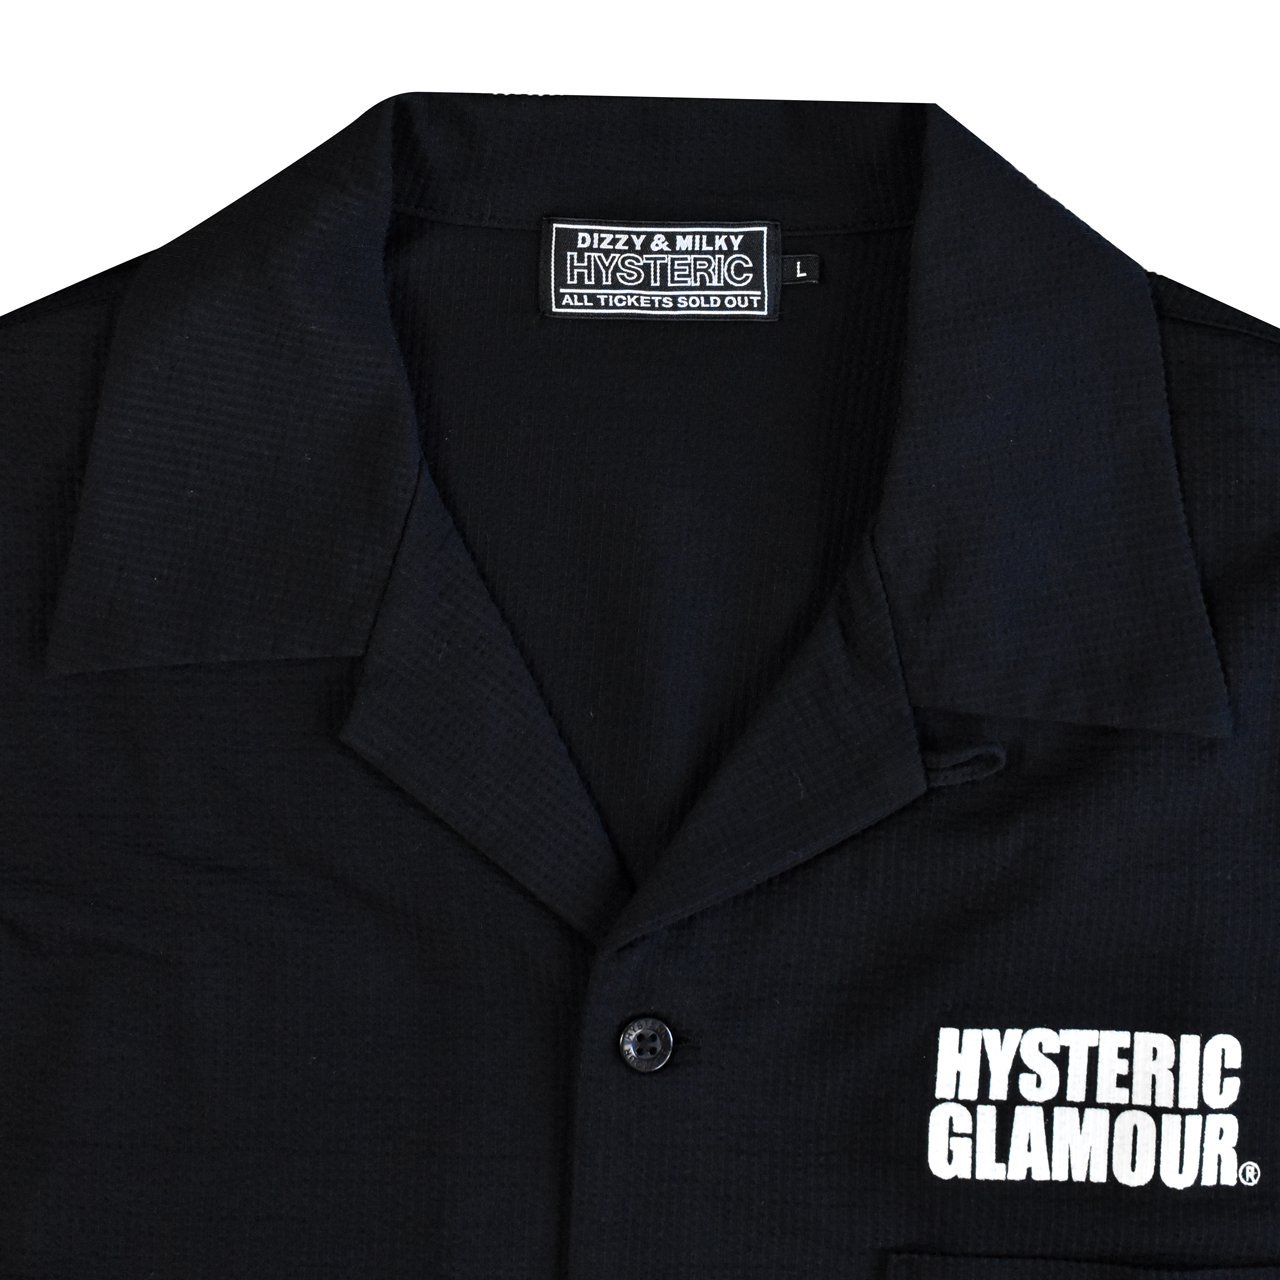 <img class='new_mark_img1' src='https://img.shop-pro.jp/img/new/icons5.gif' style='border:none;display:inline;margin:0px;padding:0px;width:auto;' />20%OFF HYSTERIC GLAMOUR (ҥƥåޡ)SEE NO EVIL  ֥å